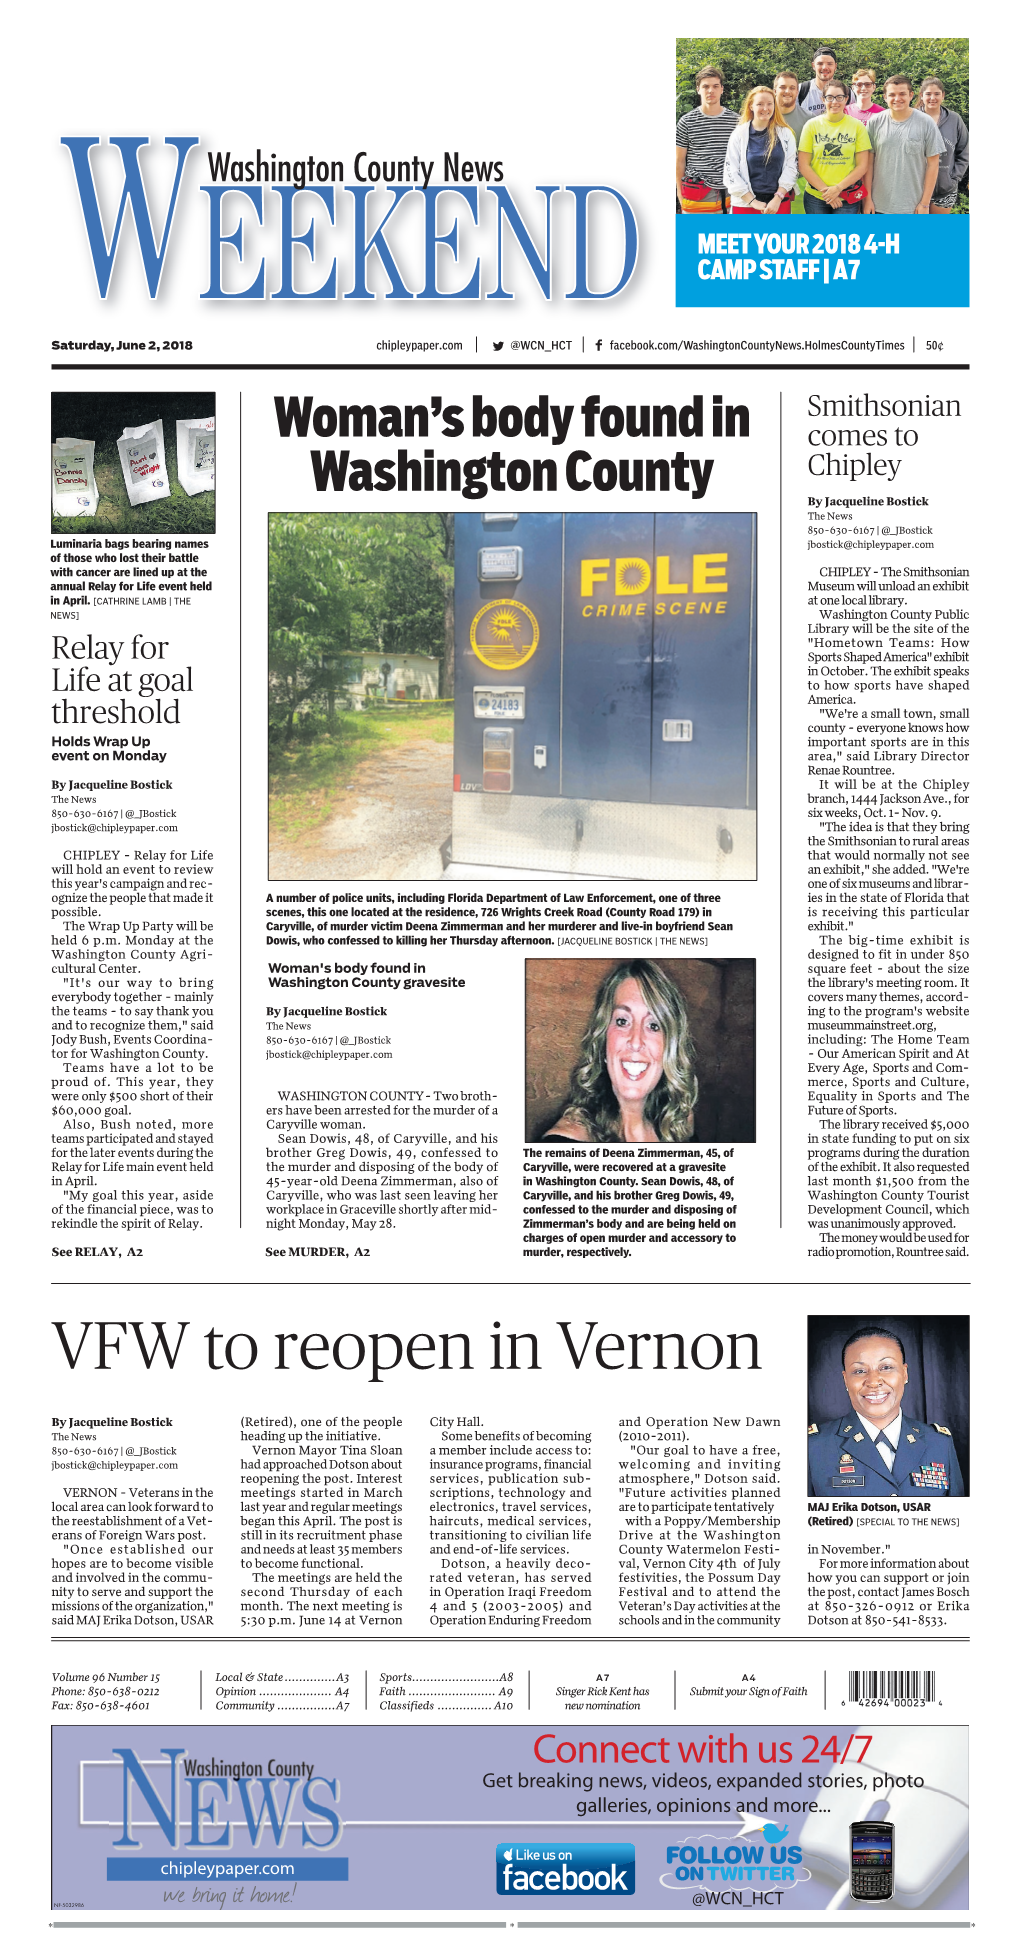 VFW to Reopen in Vernon